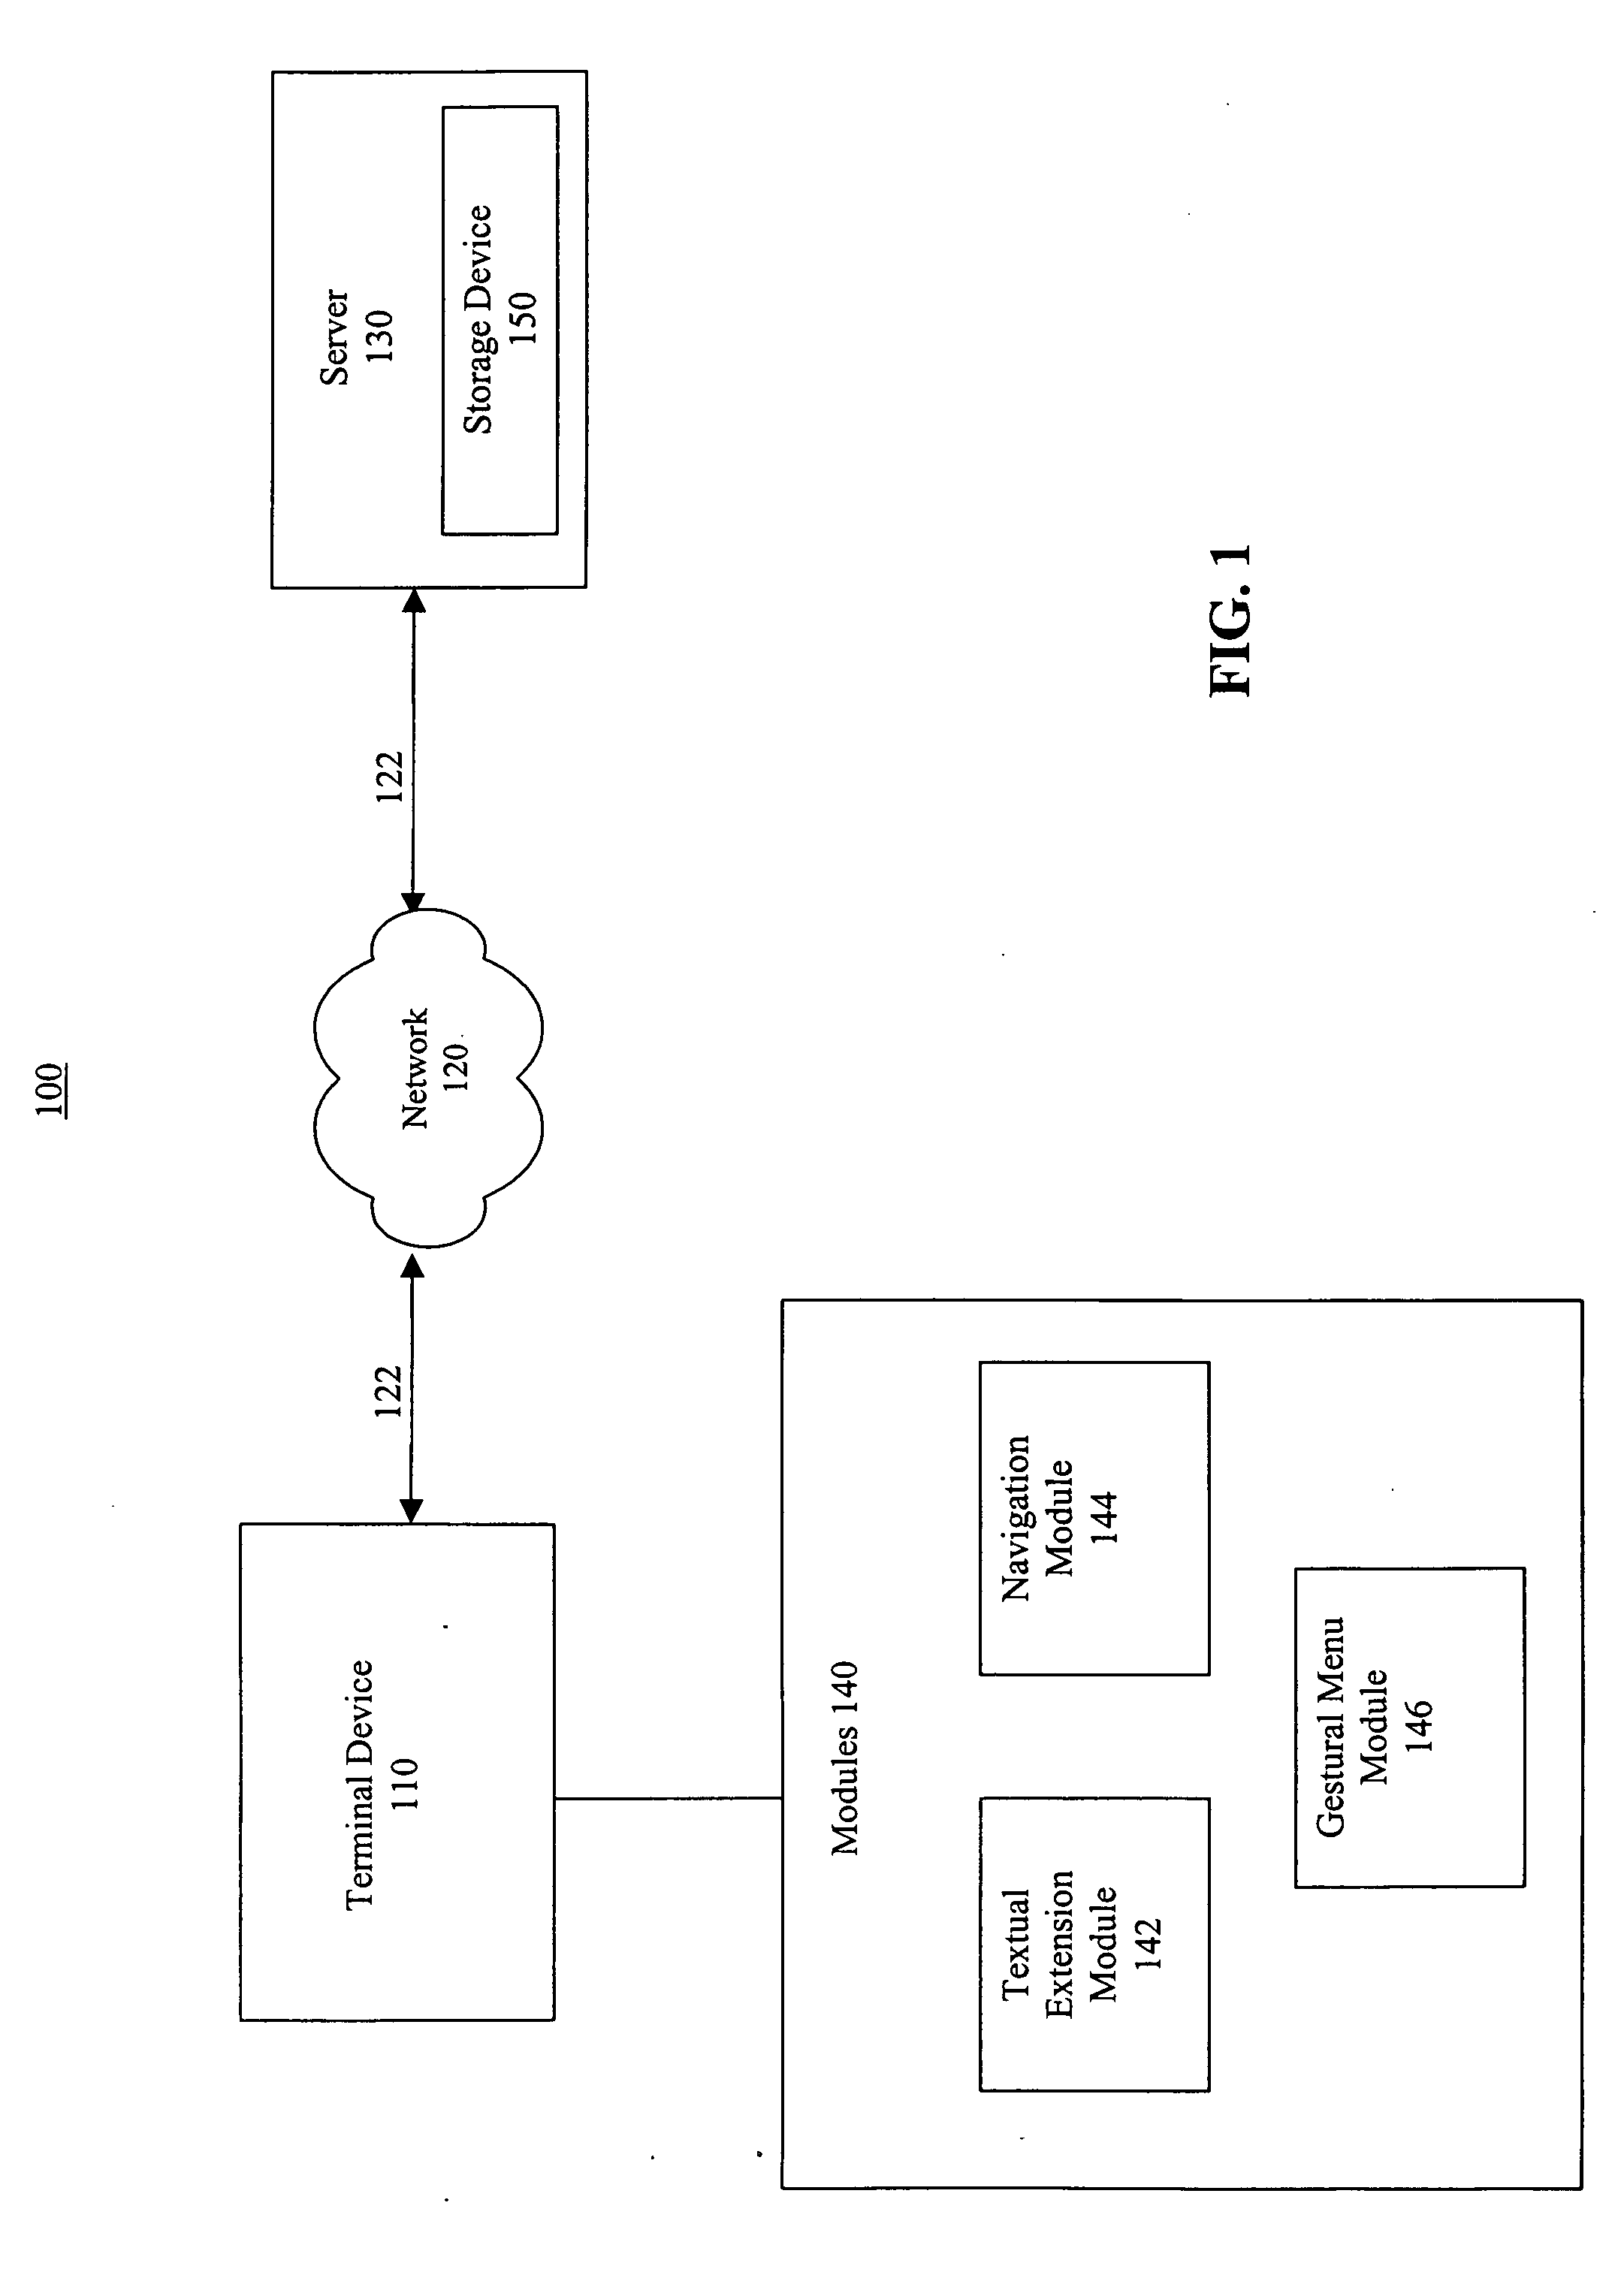 Method and apparatus for indicating and navigating related items